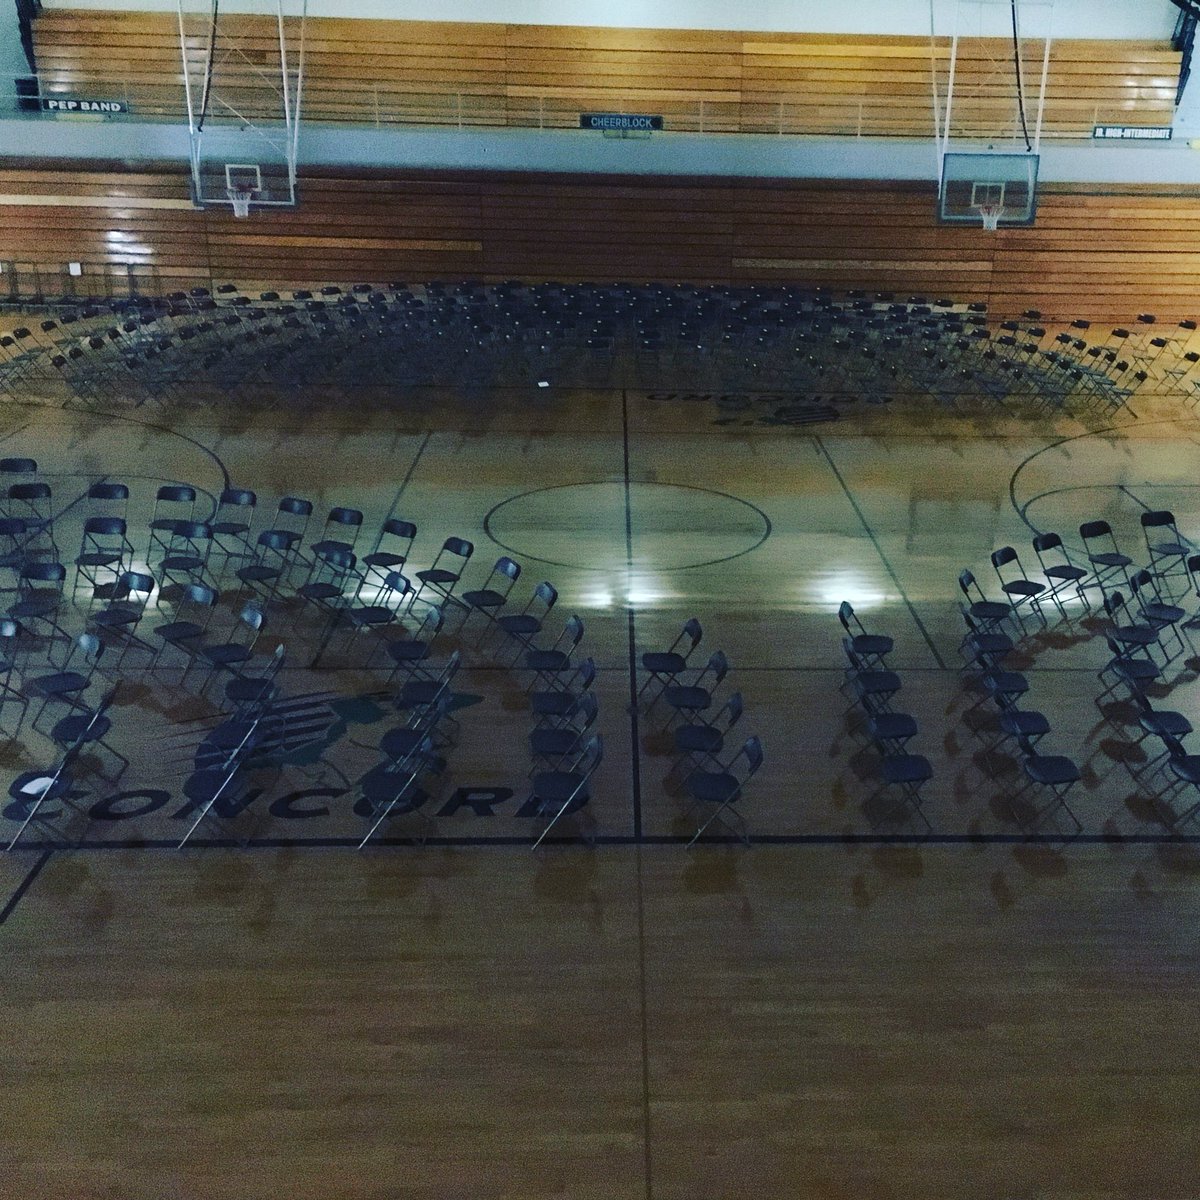 The chairs are waiting!!!! Come on out to the Concord Community Schools Orchestra Festival tomorrow night! 7:30pmbin McCuen Gym @MinutemenCHS @Concord_Schools @ConcordJH @Concord_IS #orchestralife #makemusic #minutemenmakemusic  #stringorchestra